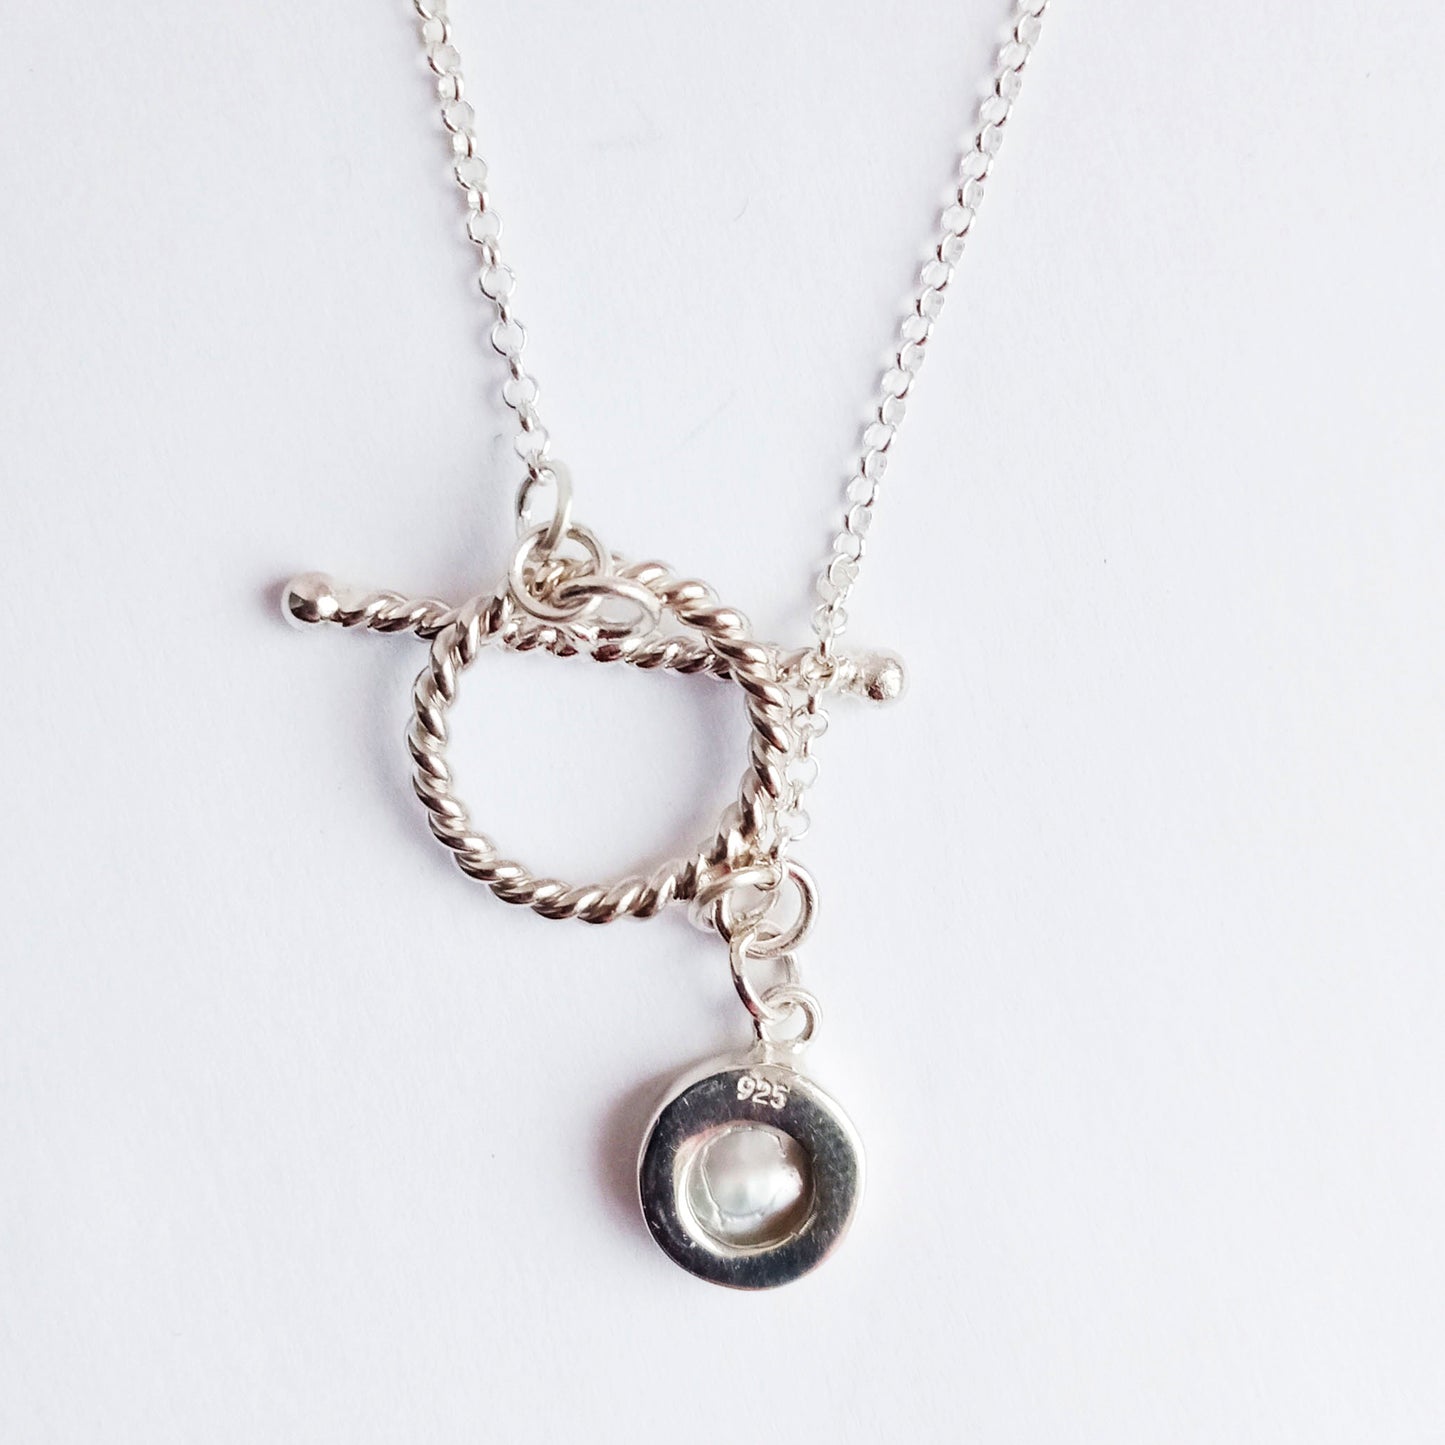 Mini Mother of Pearl Silver 925 Fob Necklace